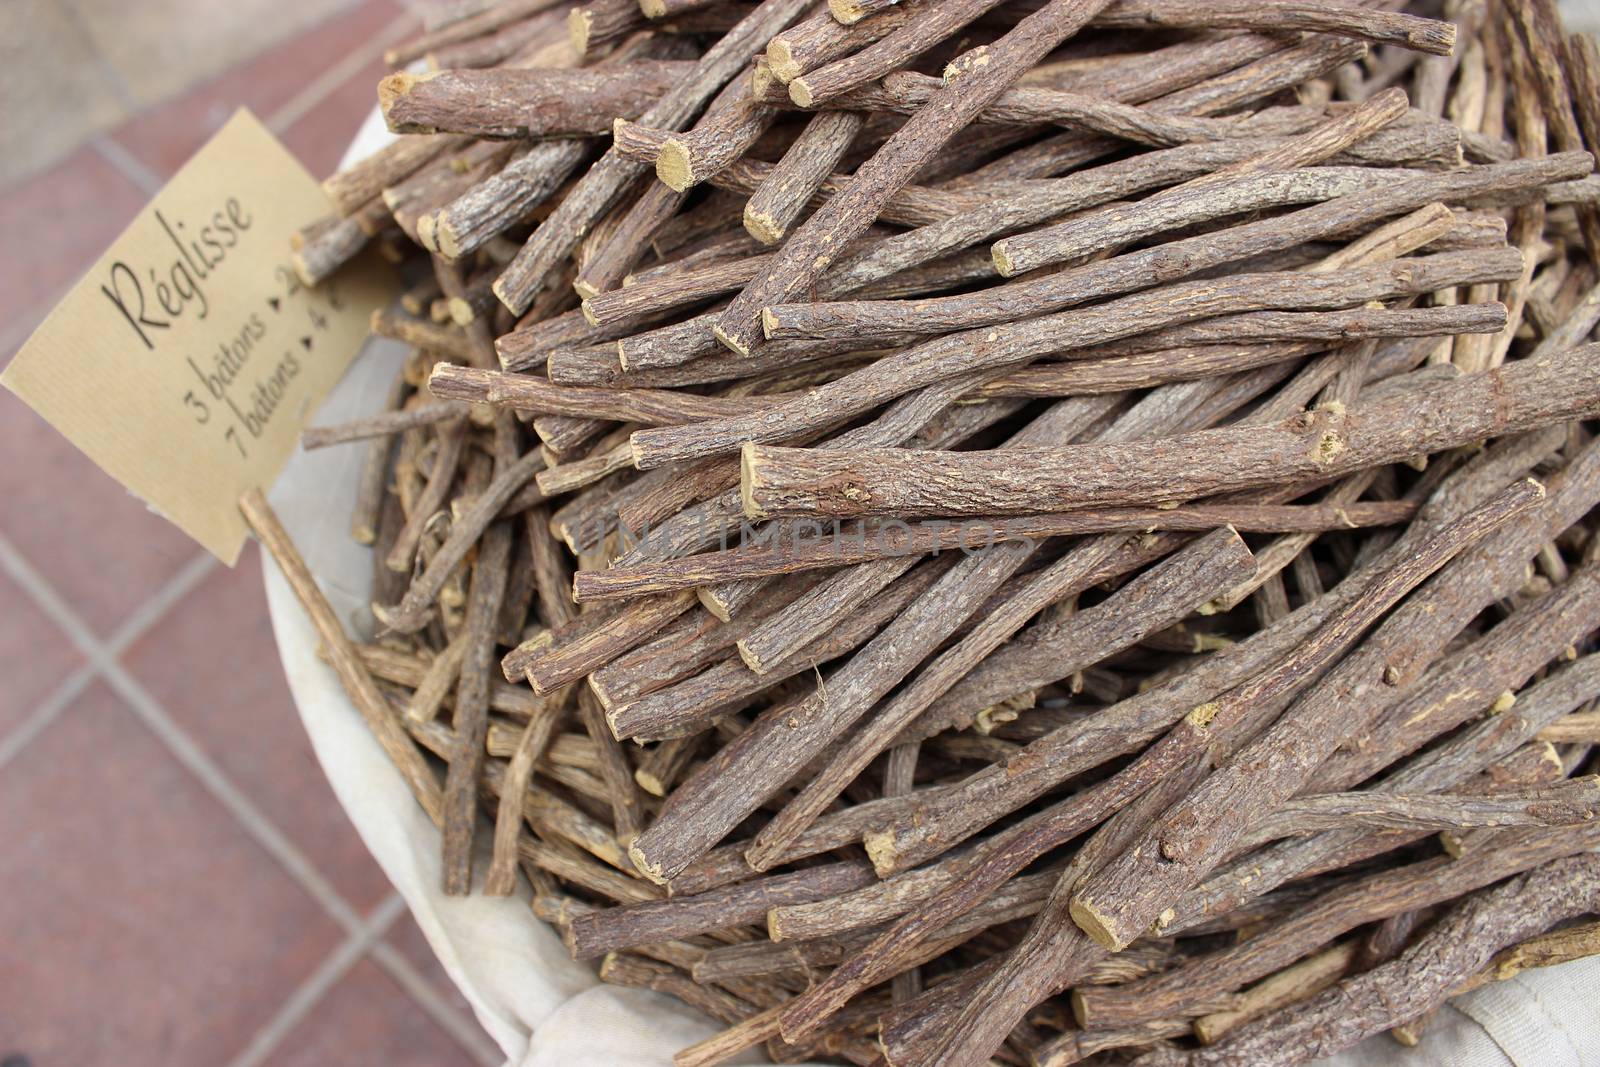 Licorice Sticks for sale in the market in France